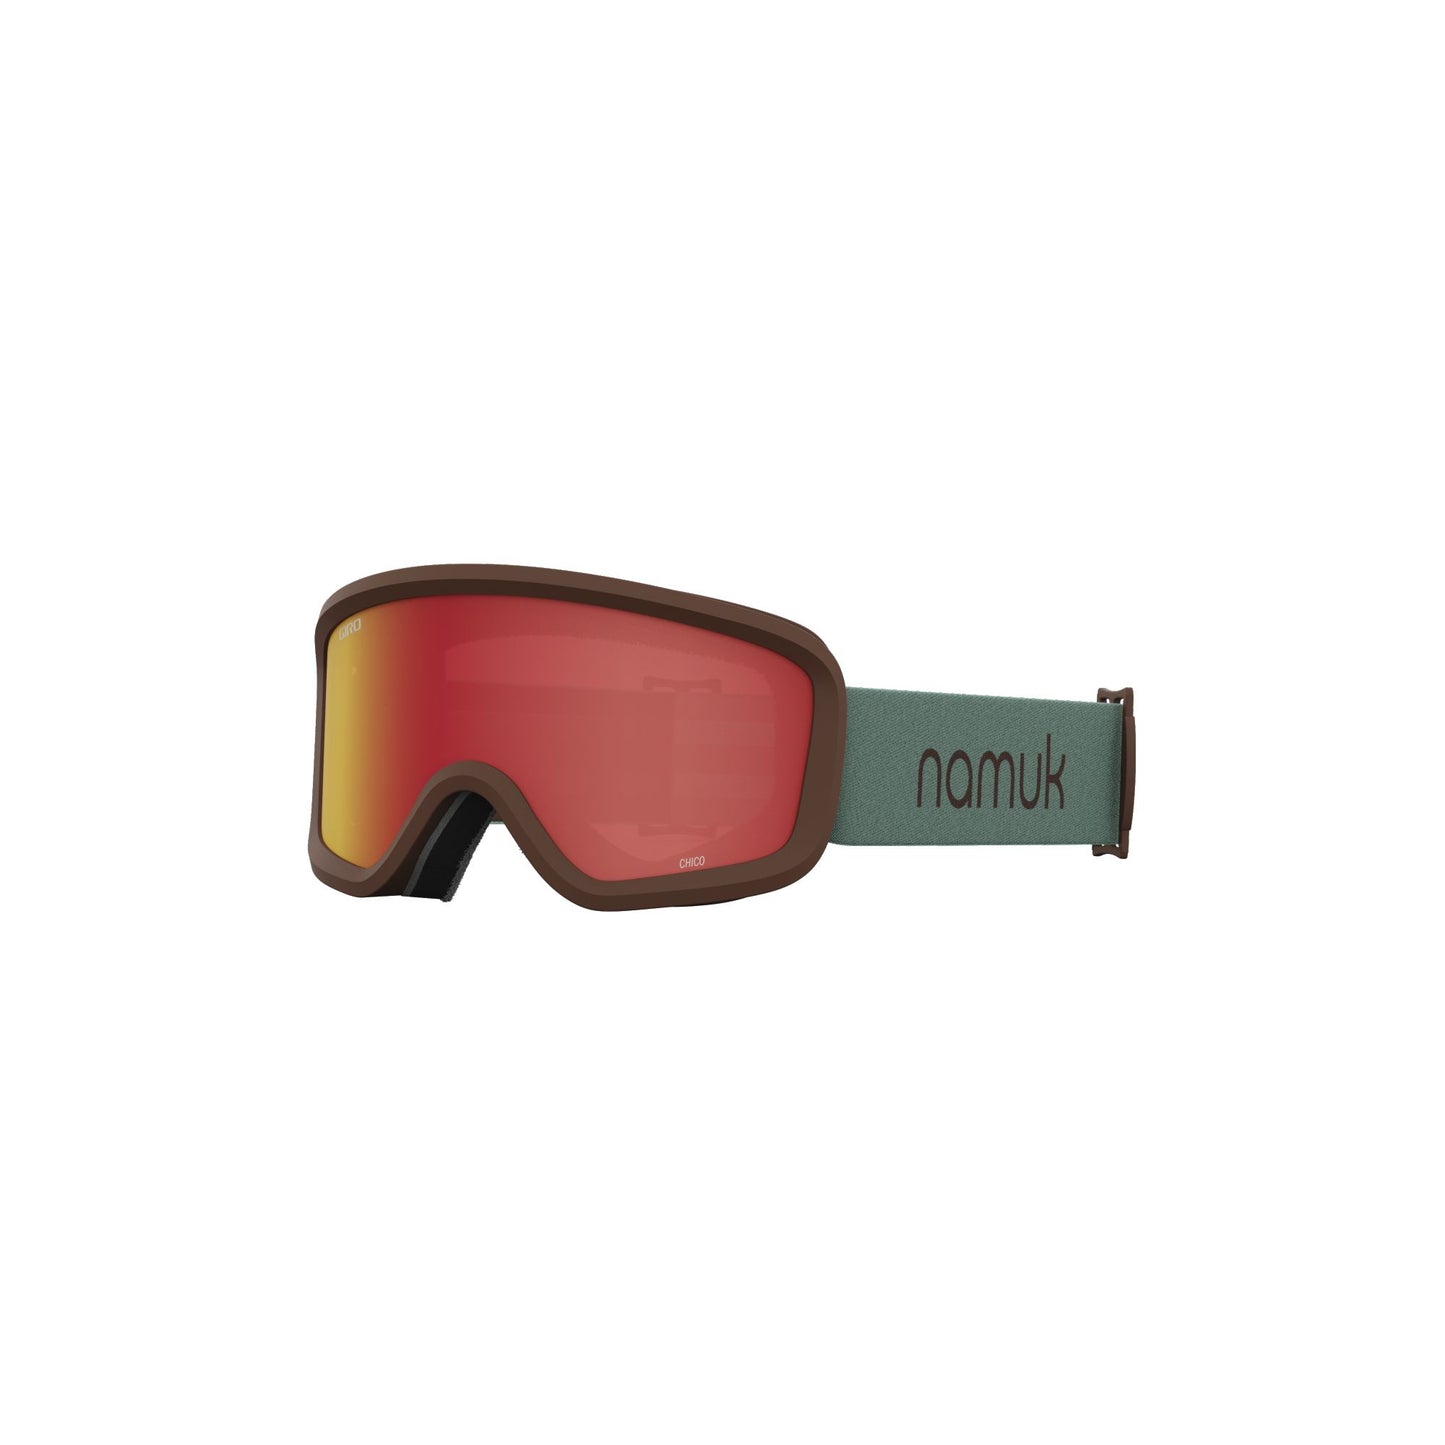 Giro Youth Chico 2.0 Snow Goggles Namuk Northern Lights/Chocolate/Amber Scarlet Snow Goggles